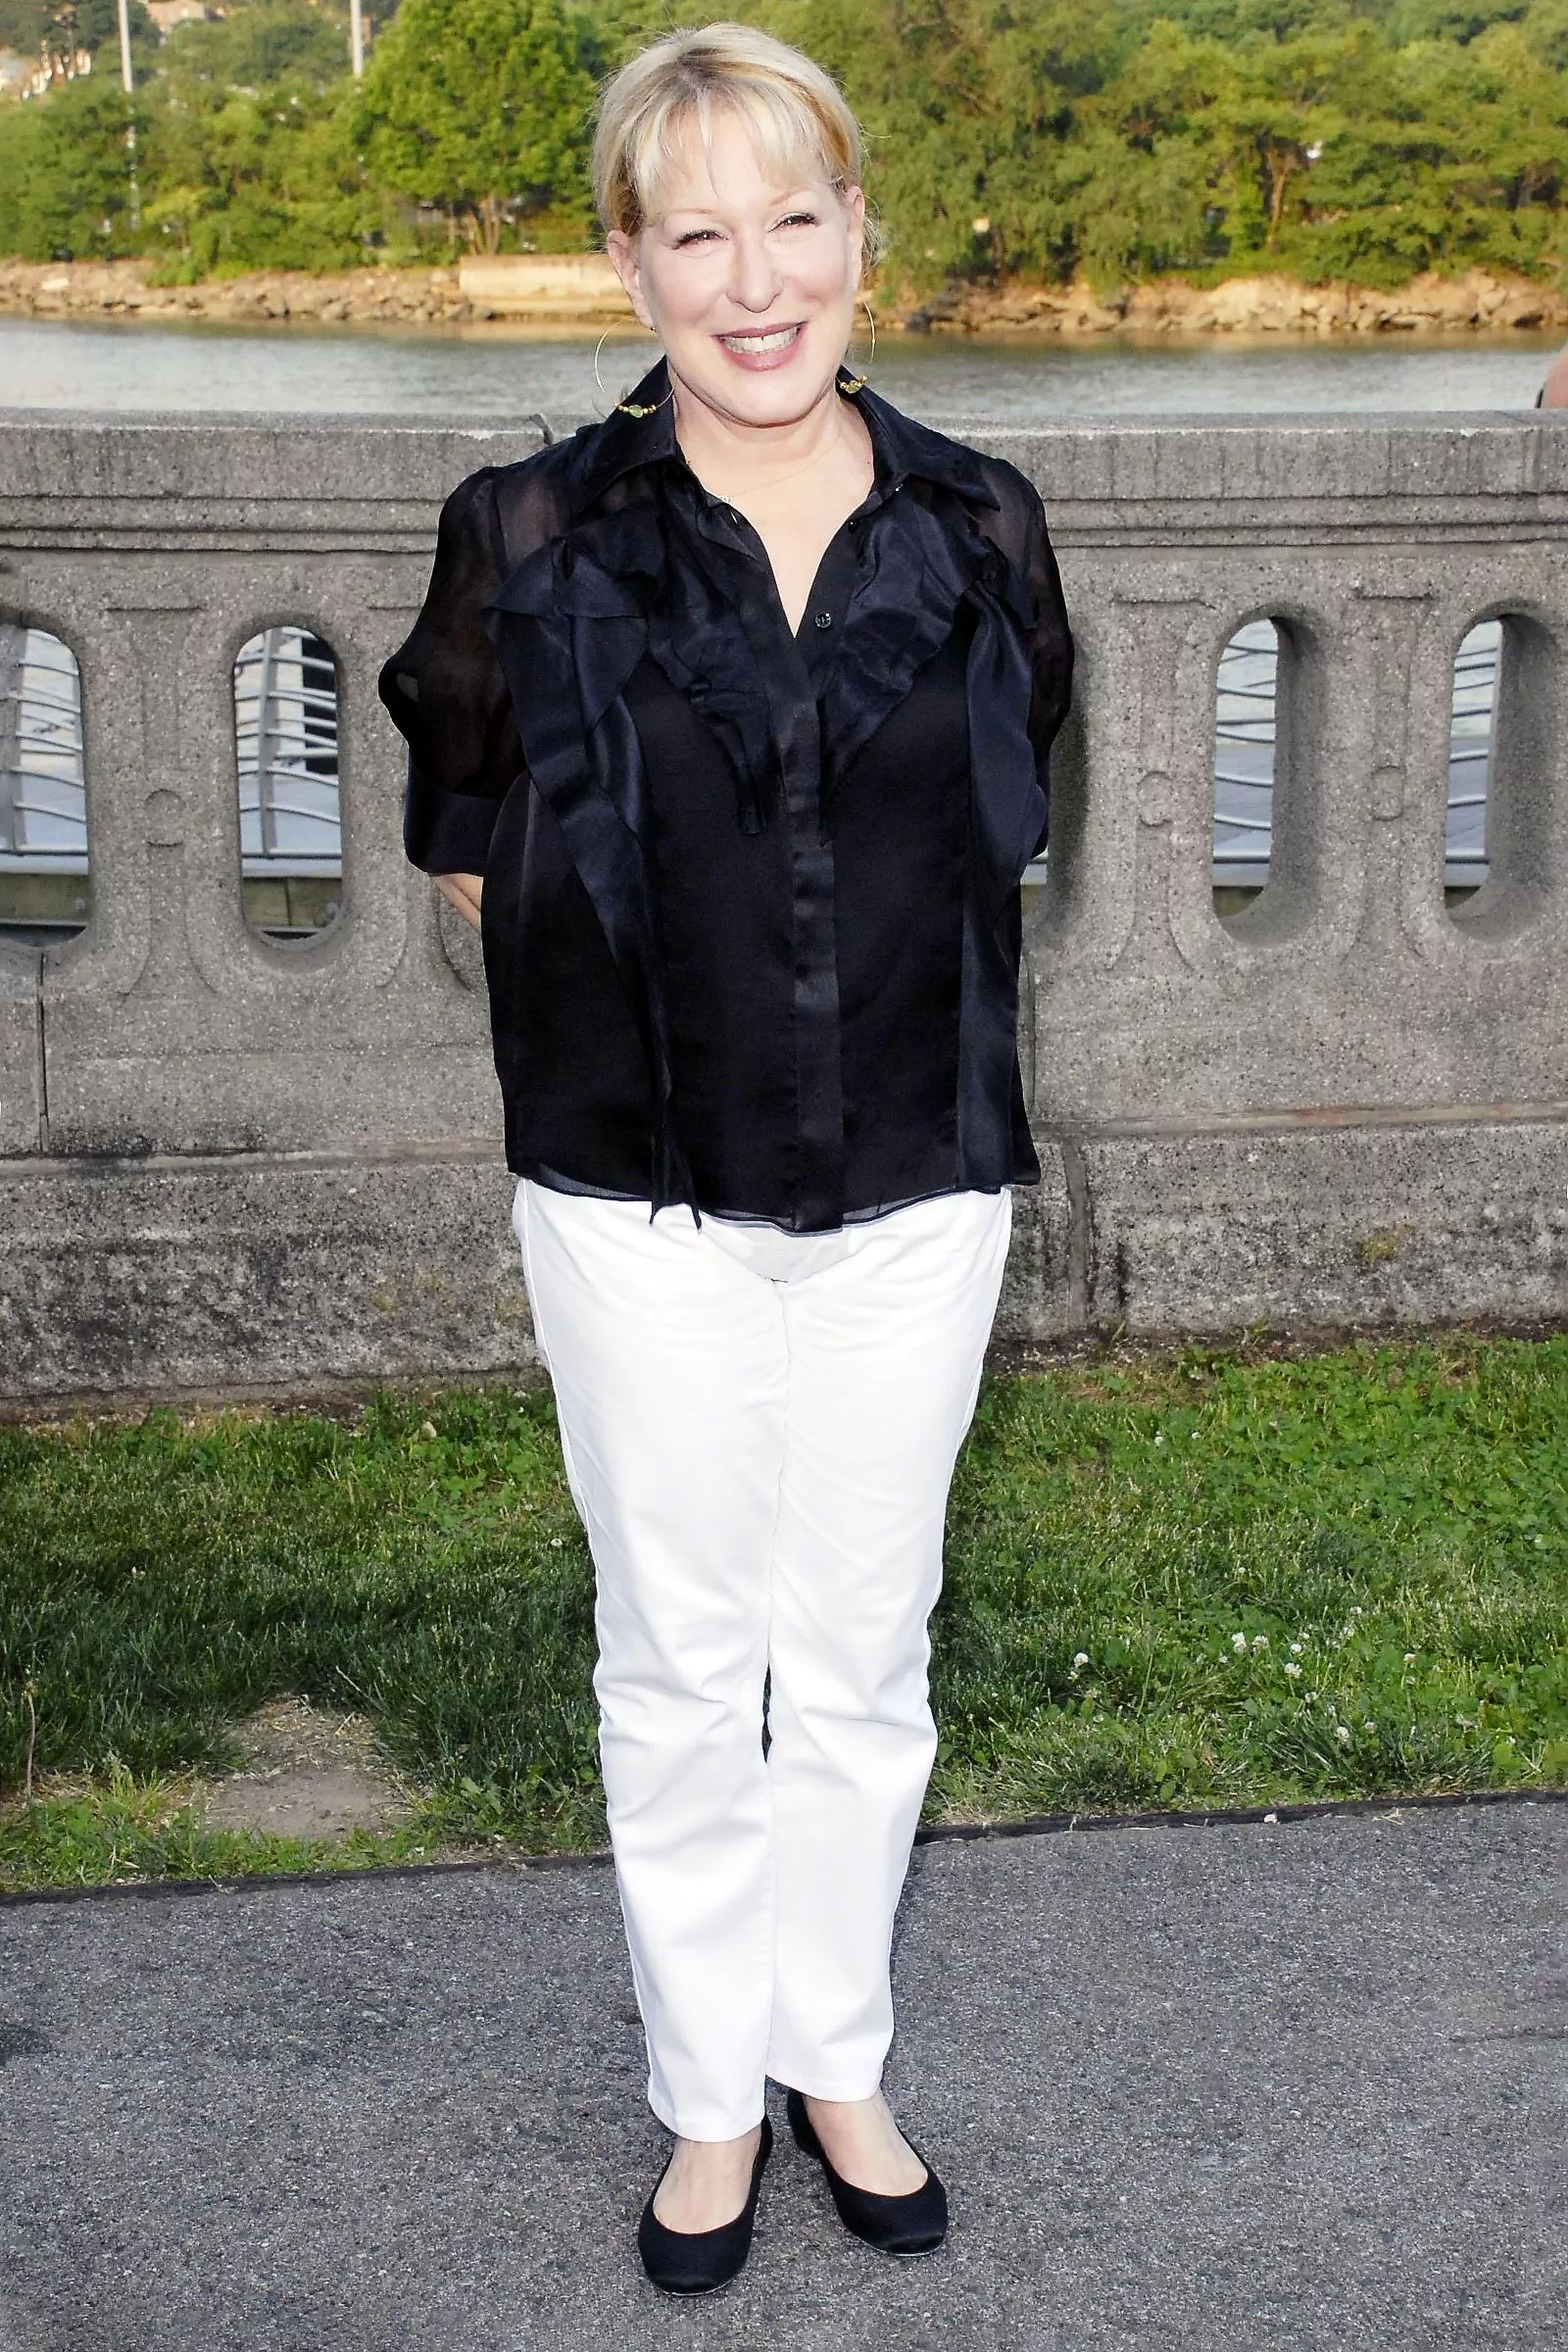 Bette Midler at the 6th Annual Swindler Cove Park Picnic, May 31, 2007